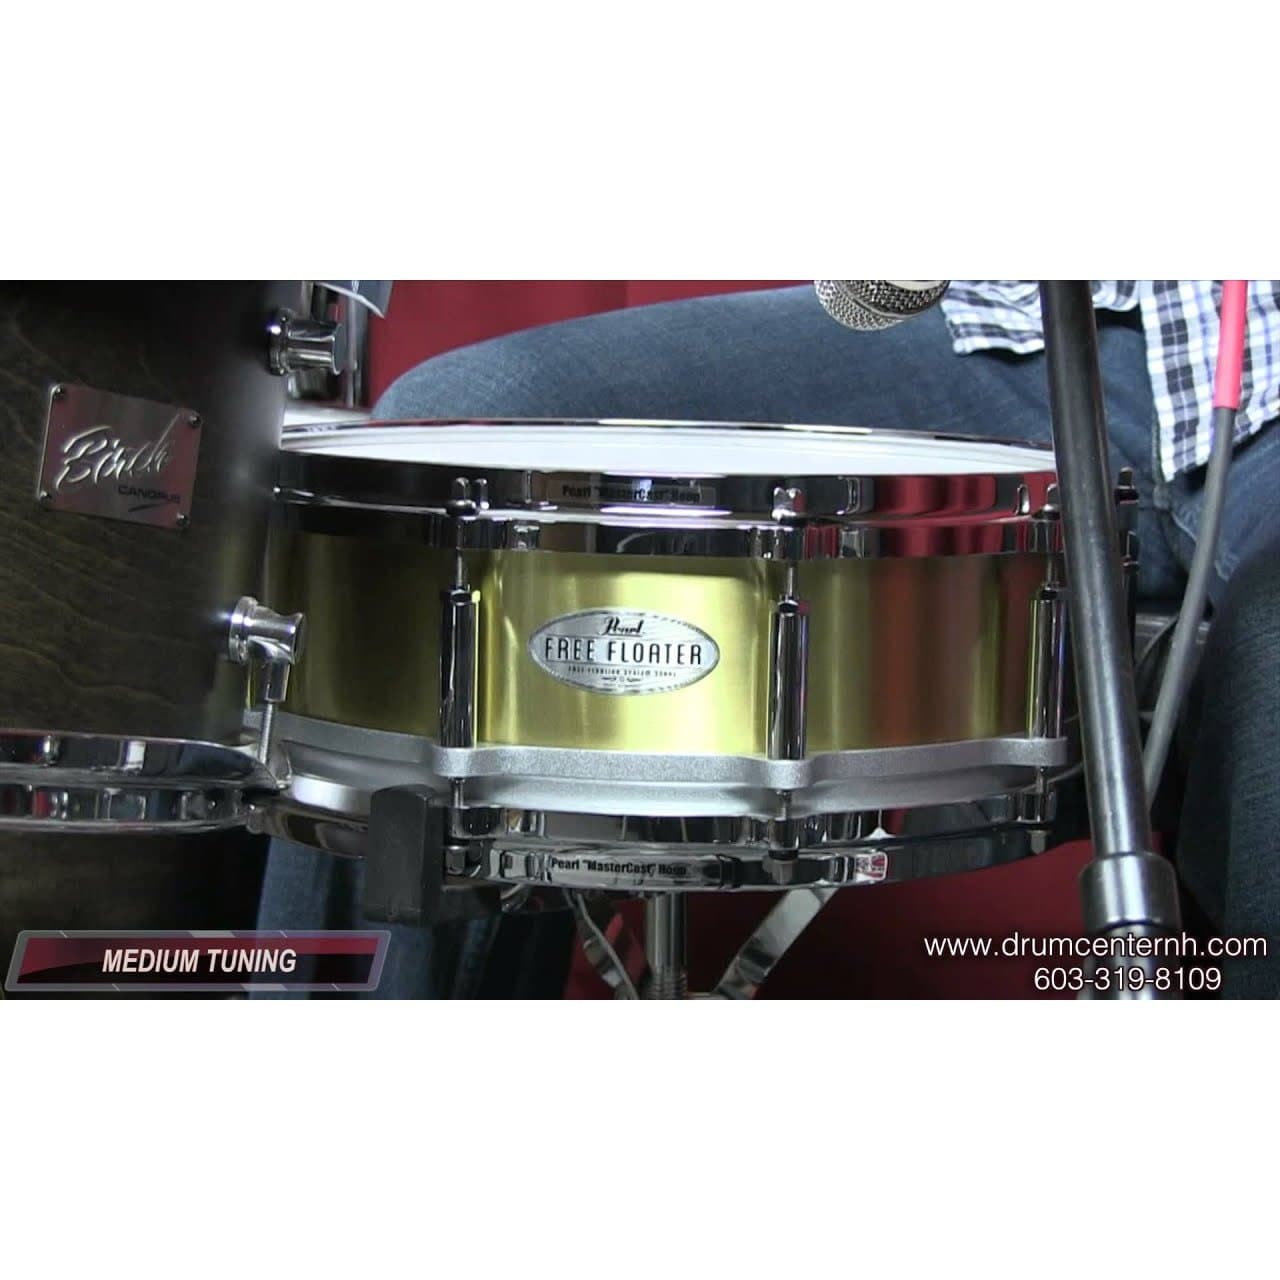 Pearl UBH1455 Universal Snare 14x5,5 Hammered Brass favorable buying at  our shop